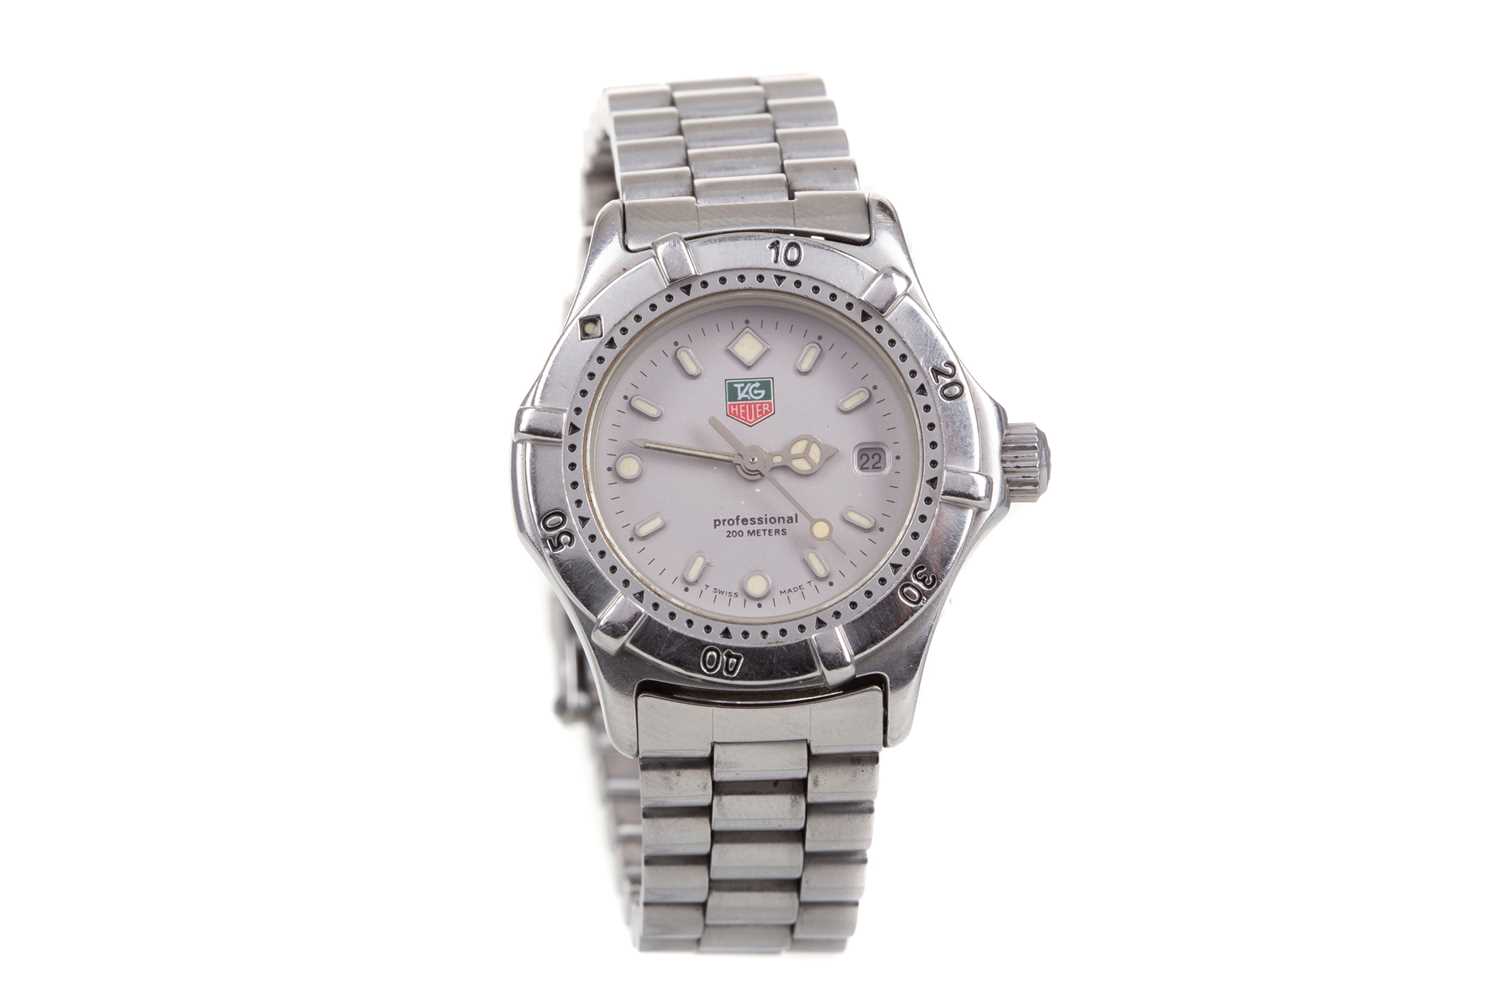 Lot 850 - A LADY'S TAG HEUER PROFESSIONAL STAINLESS STEEL QUARTZ WRIST WATCH